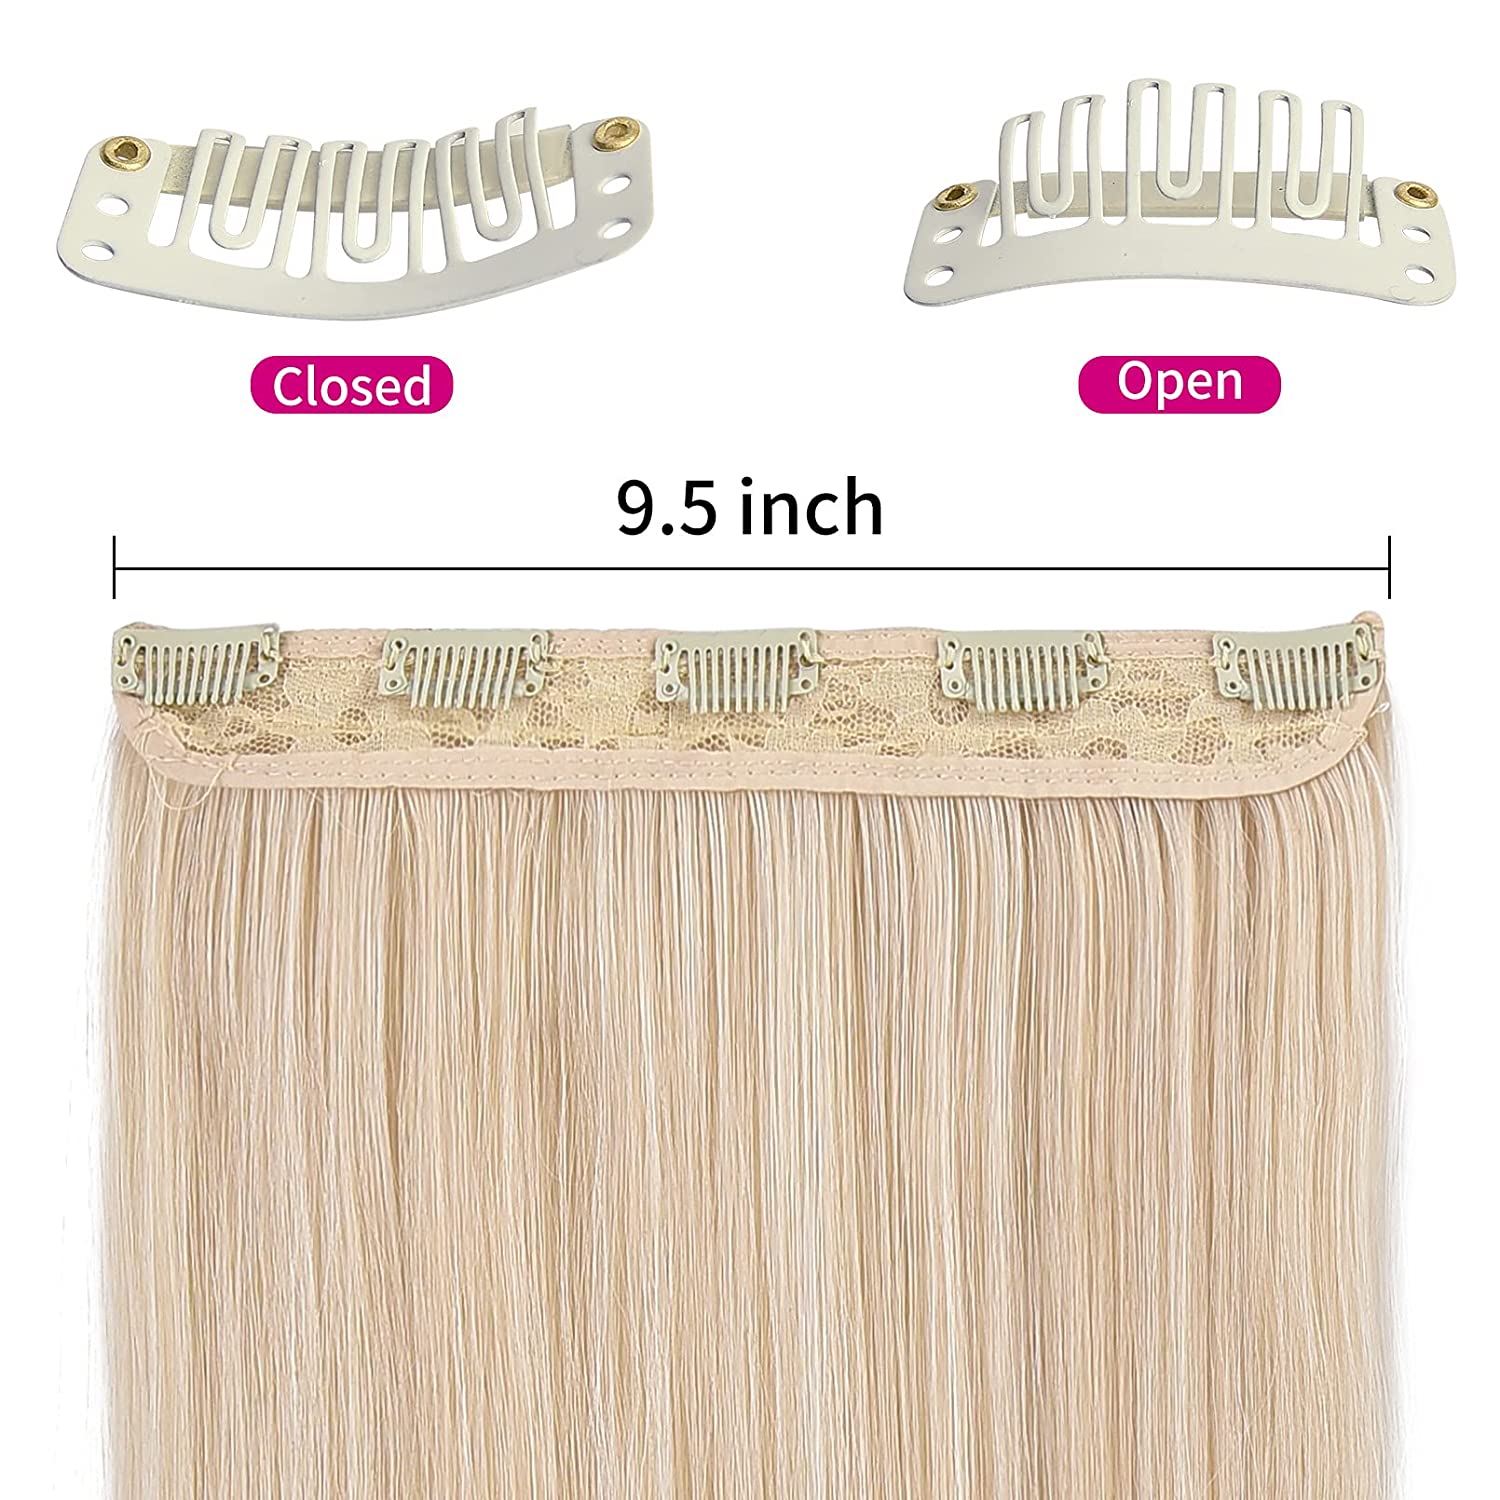 REECHO Straight Clips in hair extensions Clips on Hairpieces Synthetic Hair Extensions for Women 5 Clips per Piece